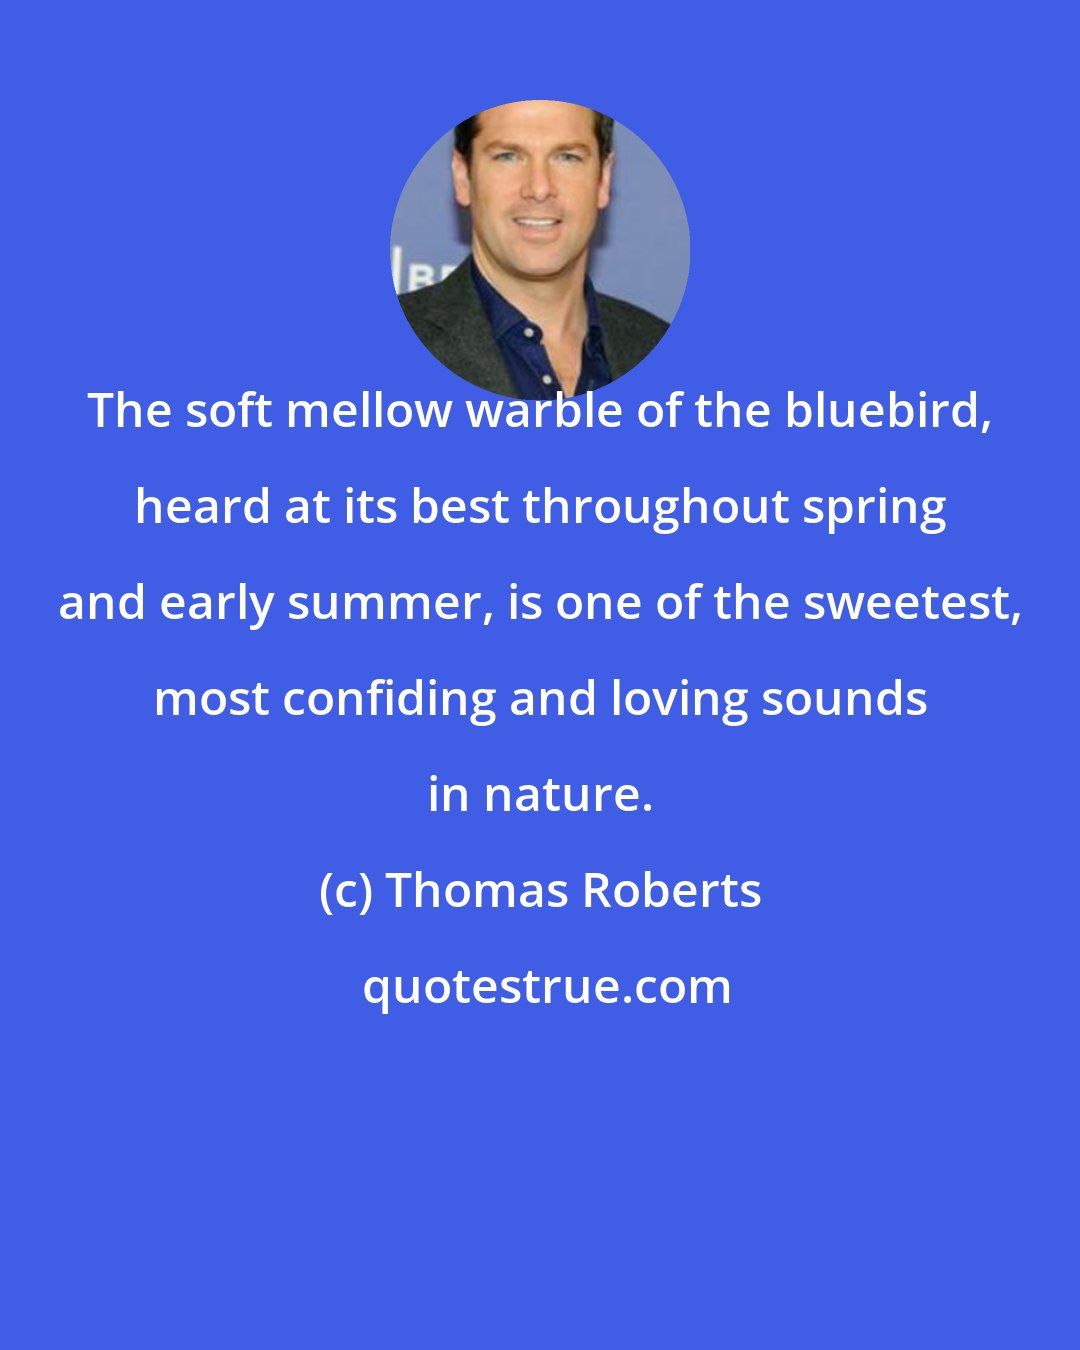 Thomas Roberts: The soft mellow warble of the bluebird, heard at its best throughout spring and early summer, is one of the sweetest, most confiding and loving sounds in nature.